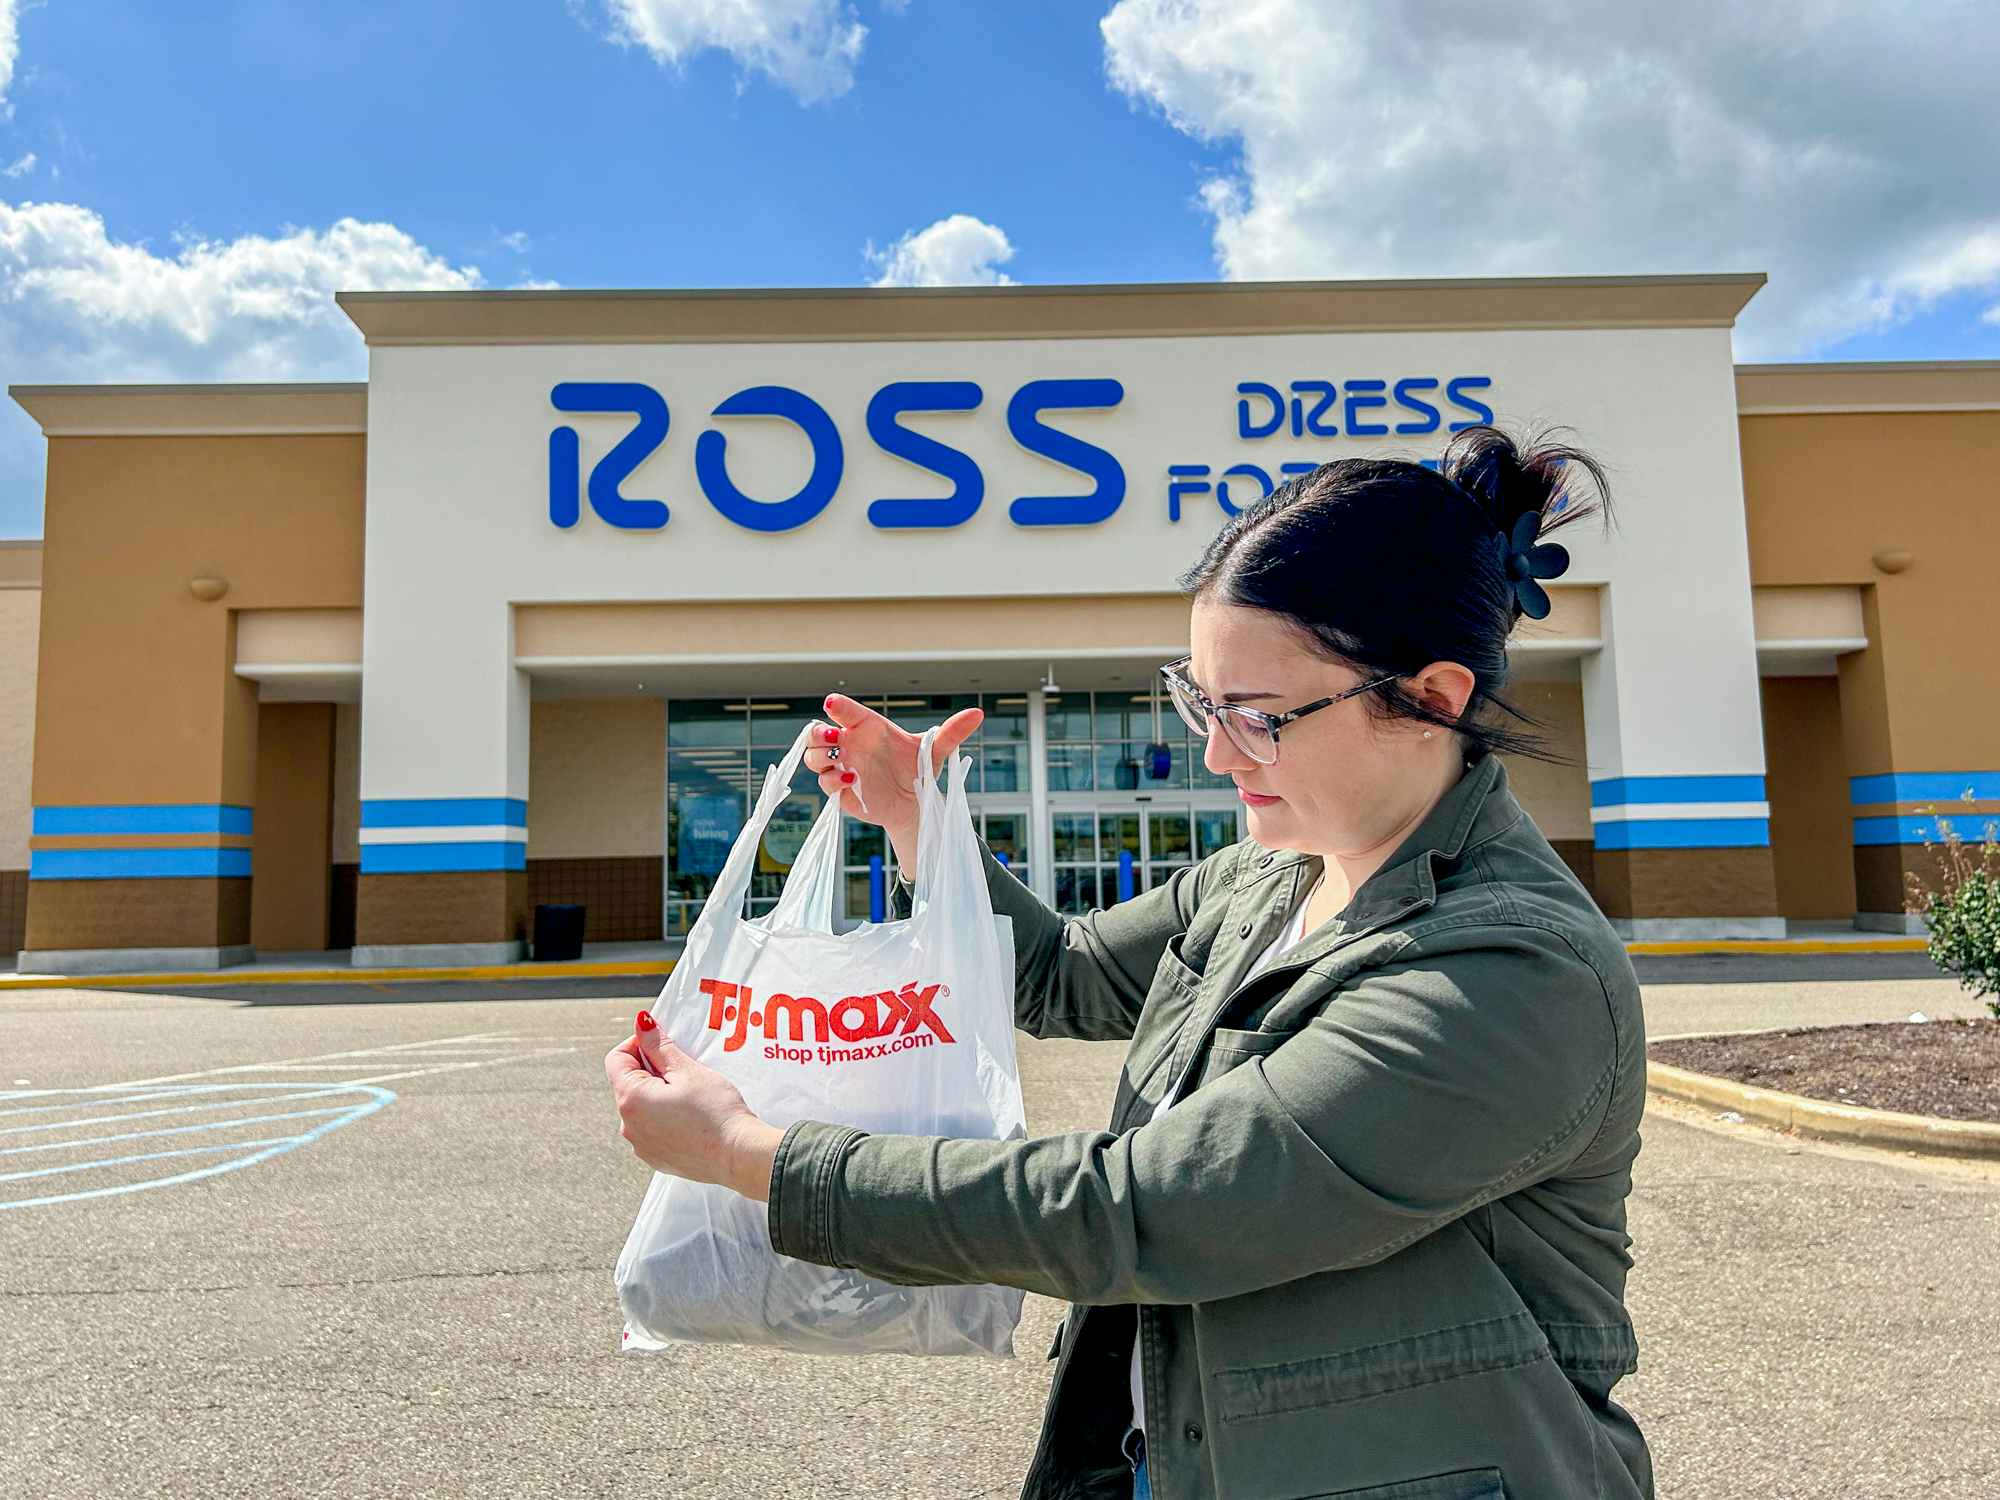 Ross vs. T.J.Maxx: Who Has the Best Deals? - The Krazy Coupon Lady